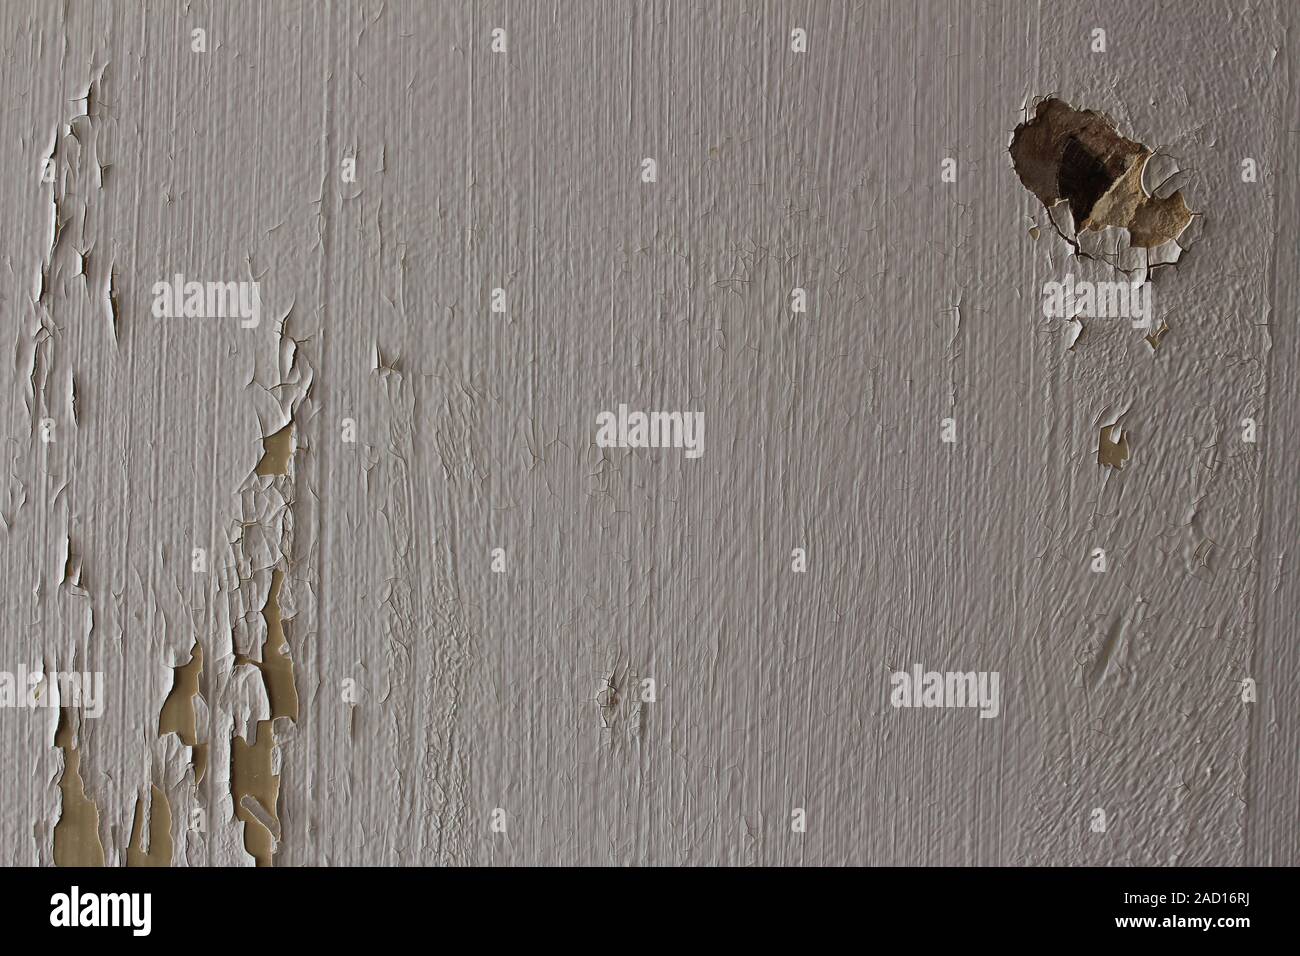 Wall with cracked white paint peeling off and a hole Stock Photo